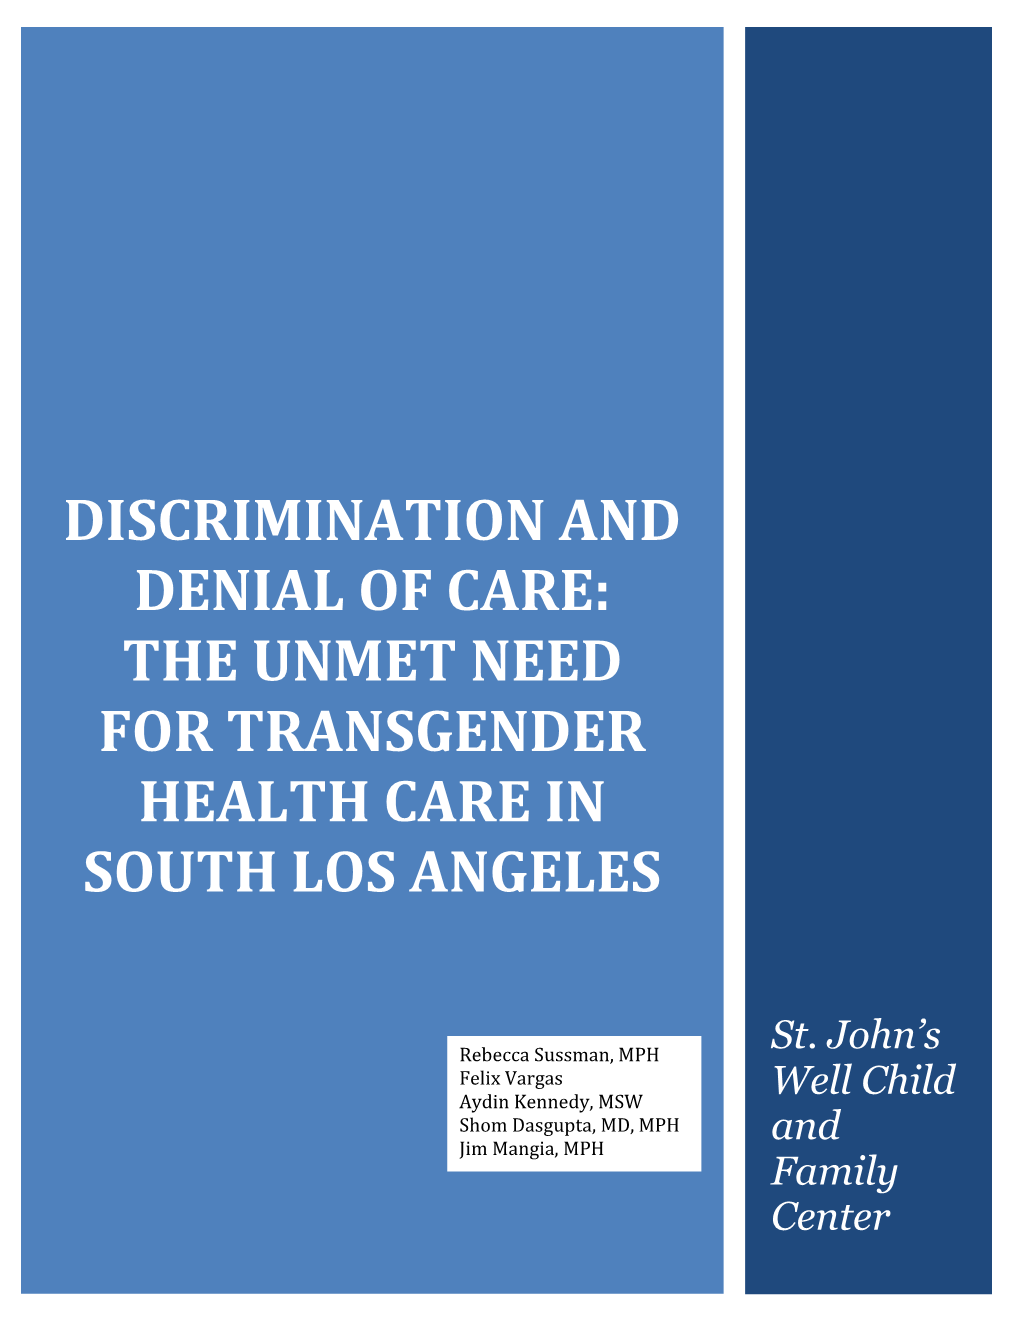 The Unmet Need for Transgender Health Care in South Los Angeles